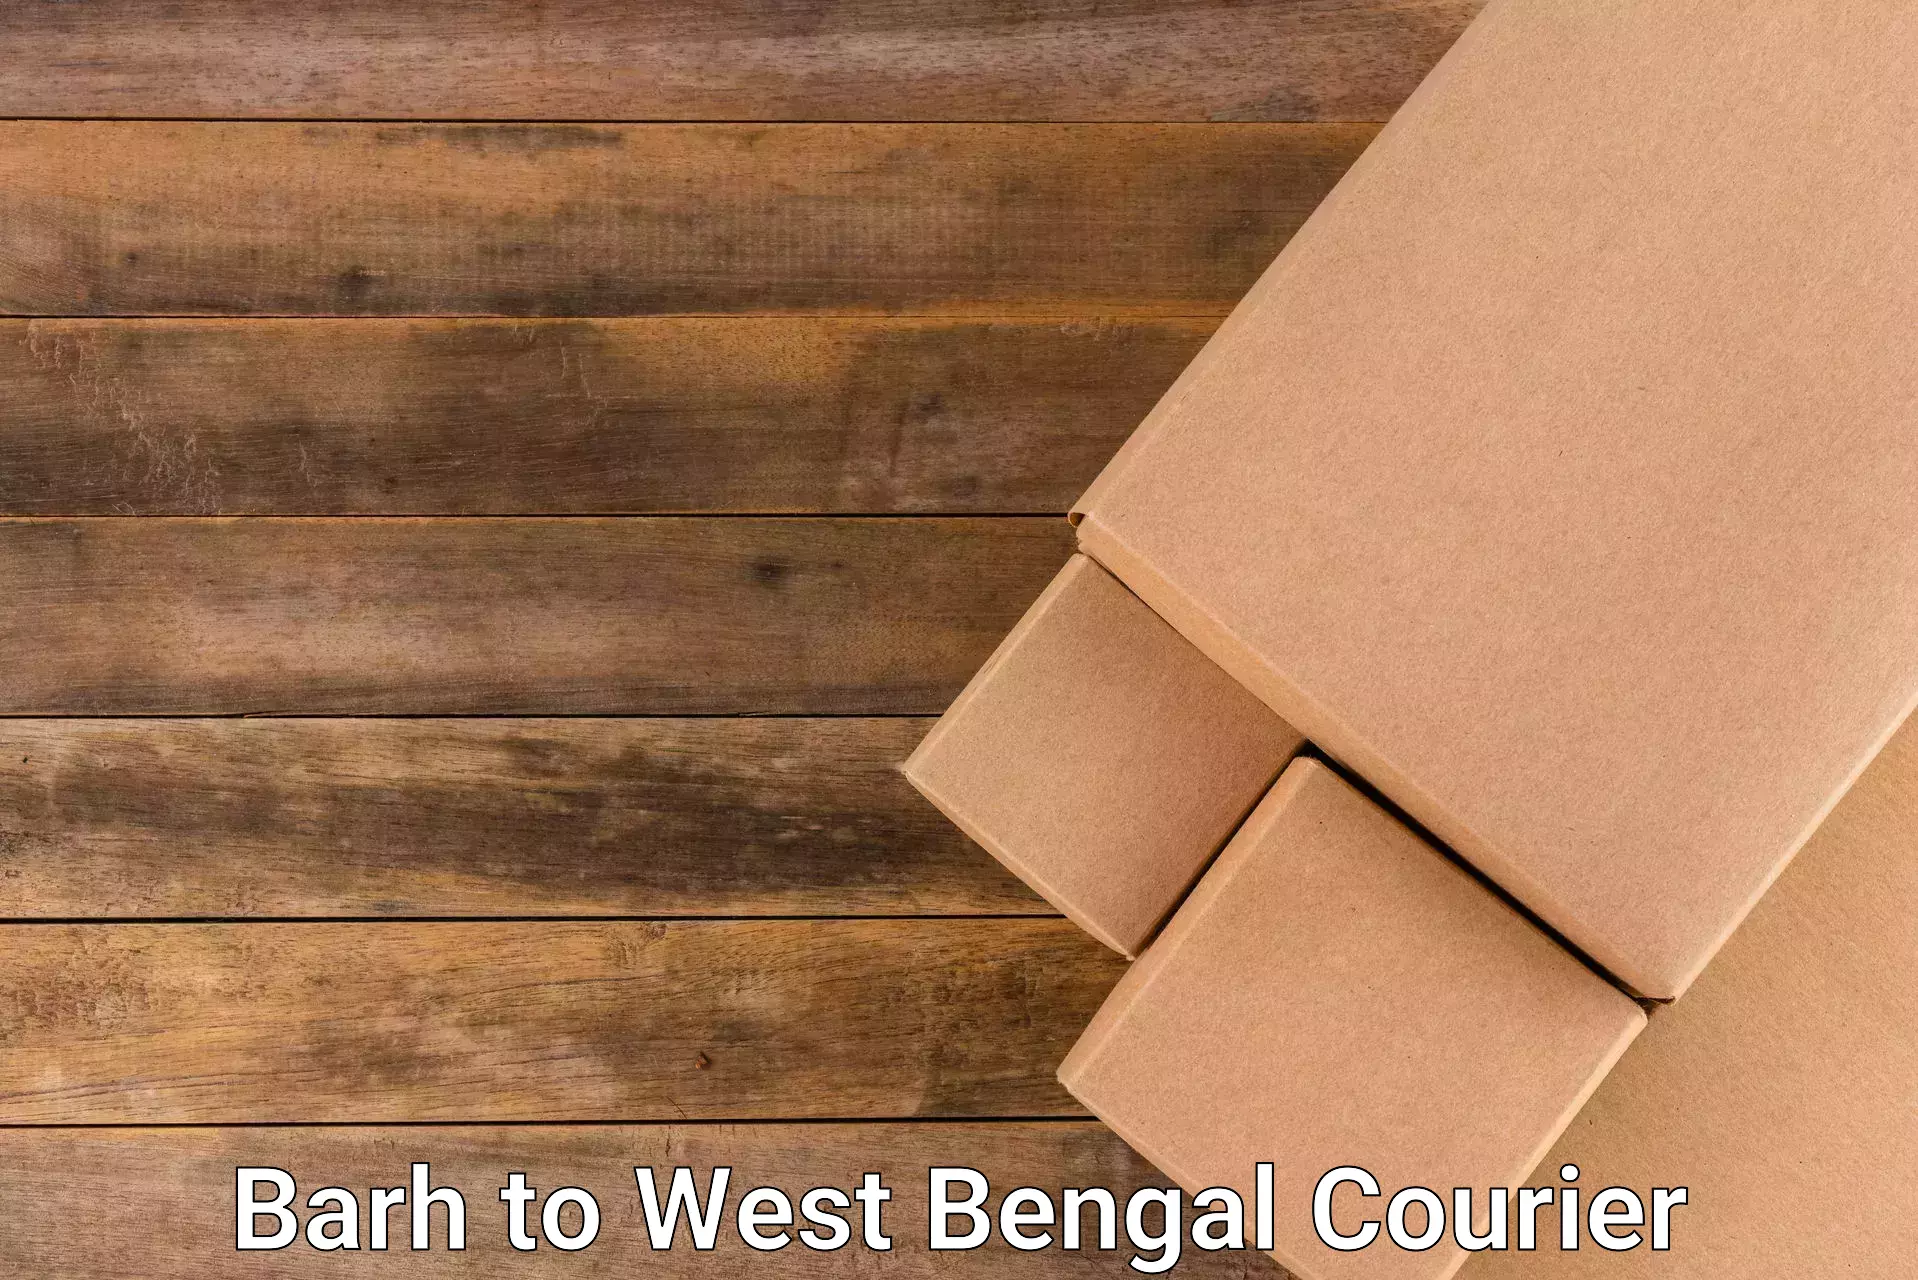 Courier services in Barh to Budge Budge